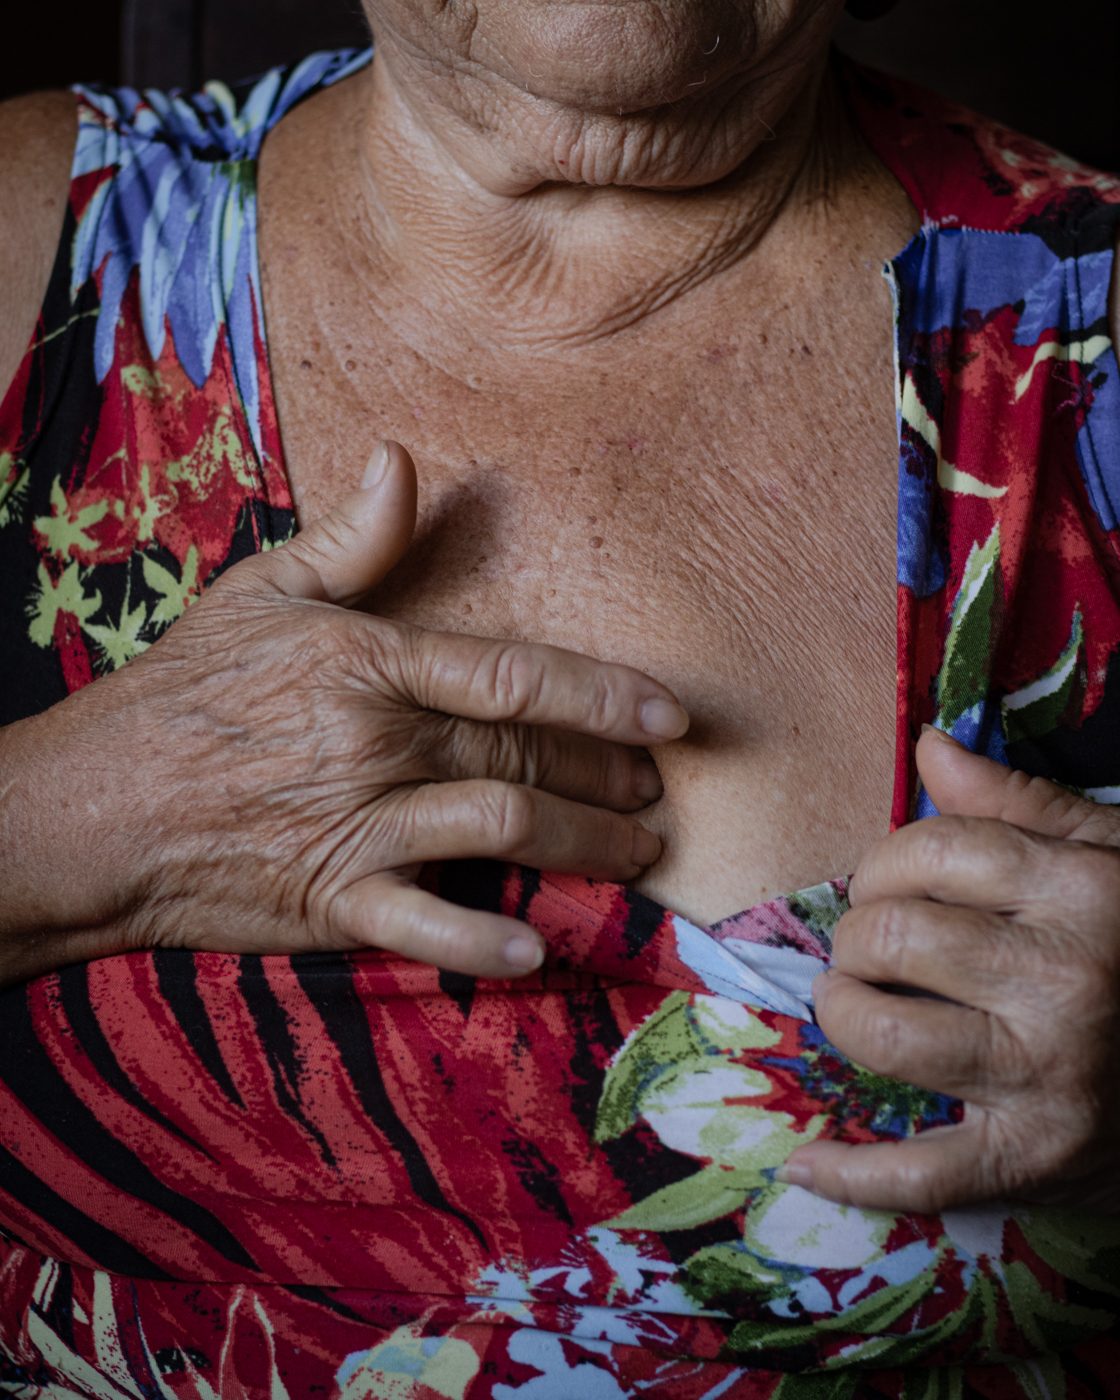 Maria Helena, bendezeira from Araçuaí, shows with her hand where in the body the "espinhela" is located. When the "espinhela" falls, a person gets "espinhela caída", which can cause a myriad of different ills.